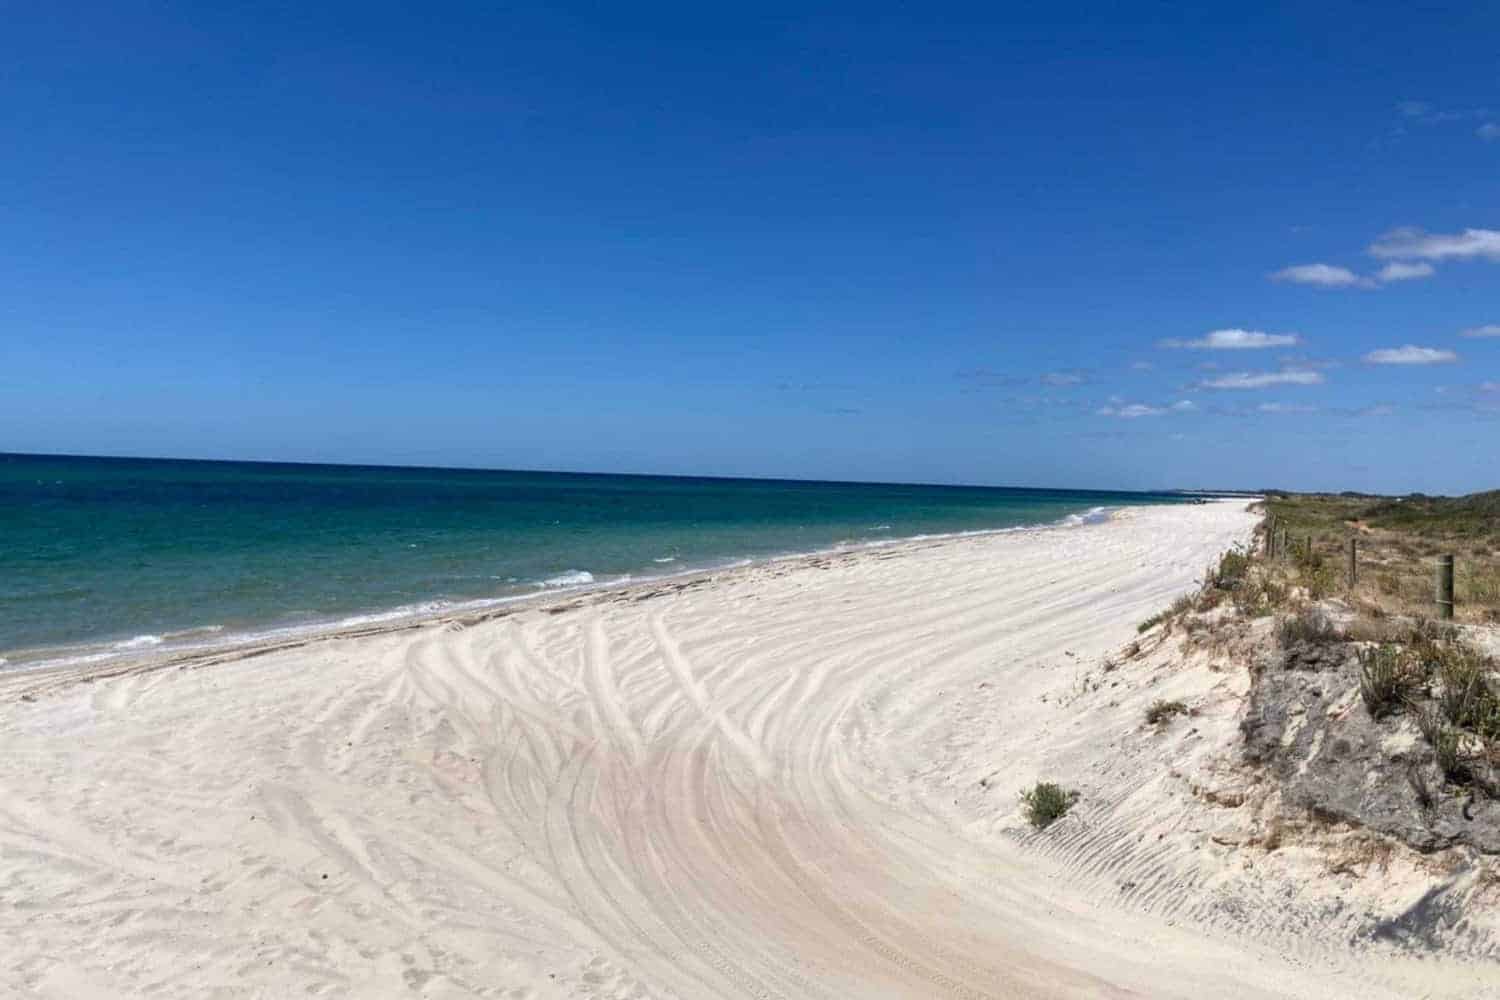 View of Wonnerup Beach, an expansive Busselton dog beach under a clear blue sky, showcasing tire tracks on the smooth white sand leading to the serene turquoise waters, with natural vegetation fringing the coastline.